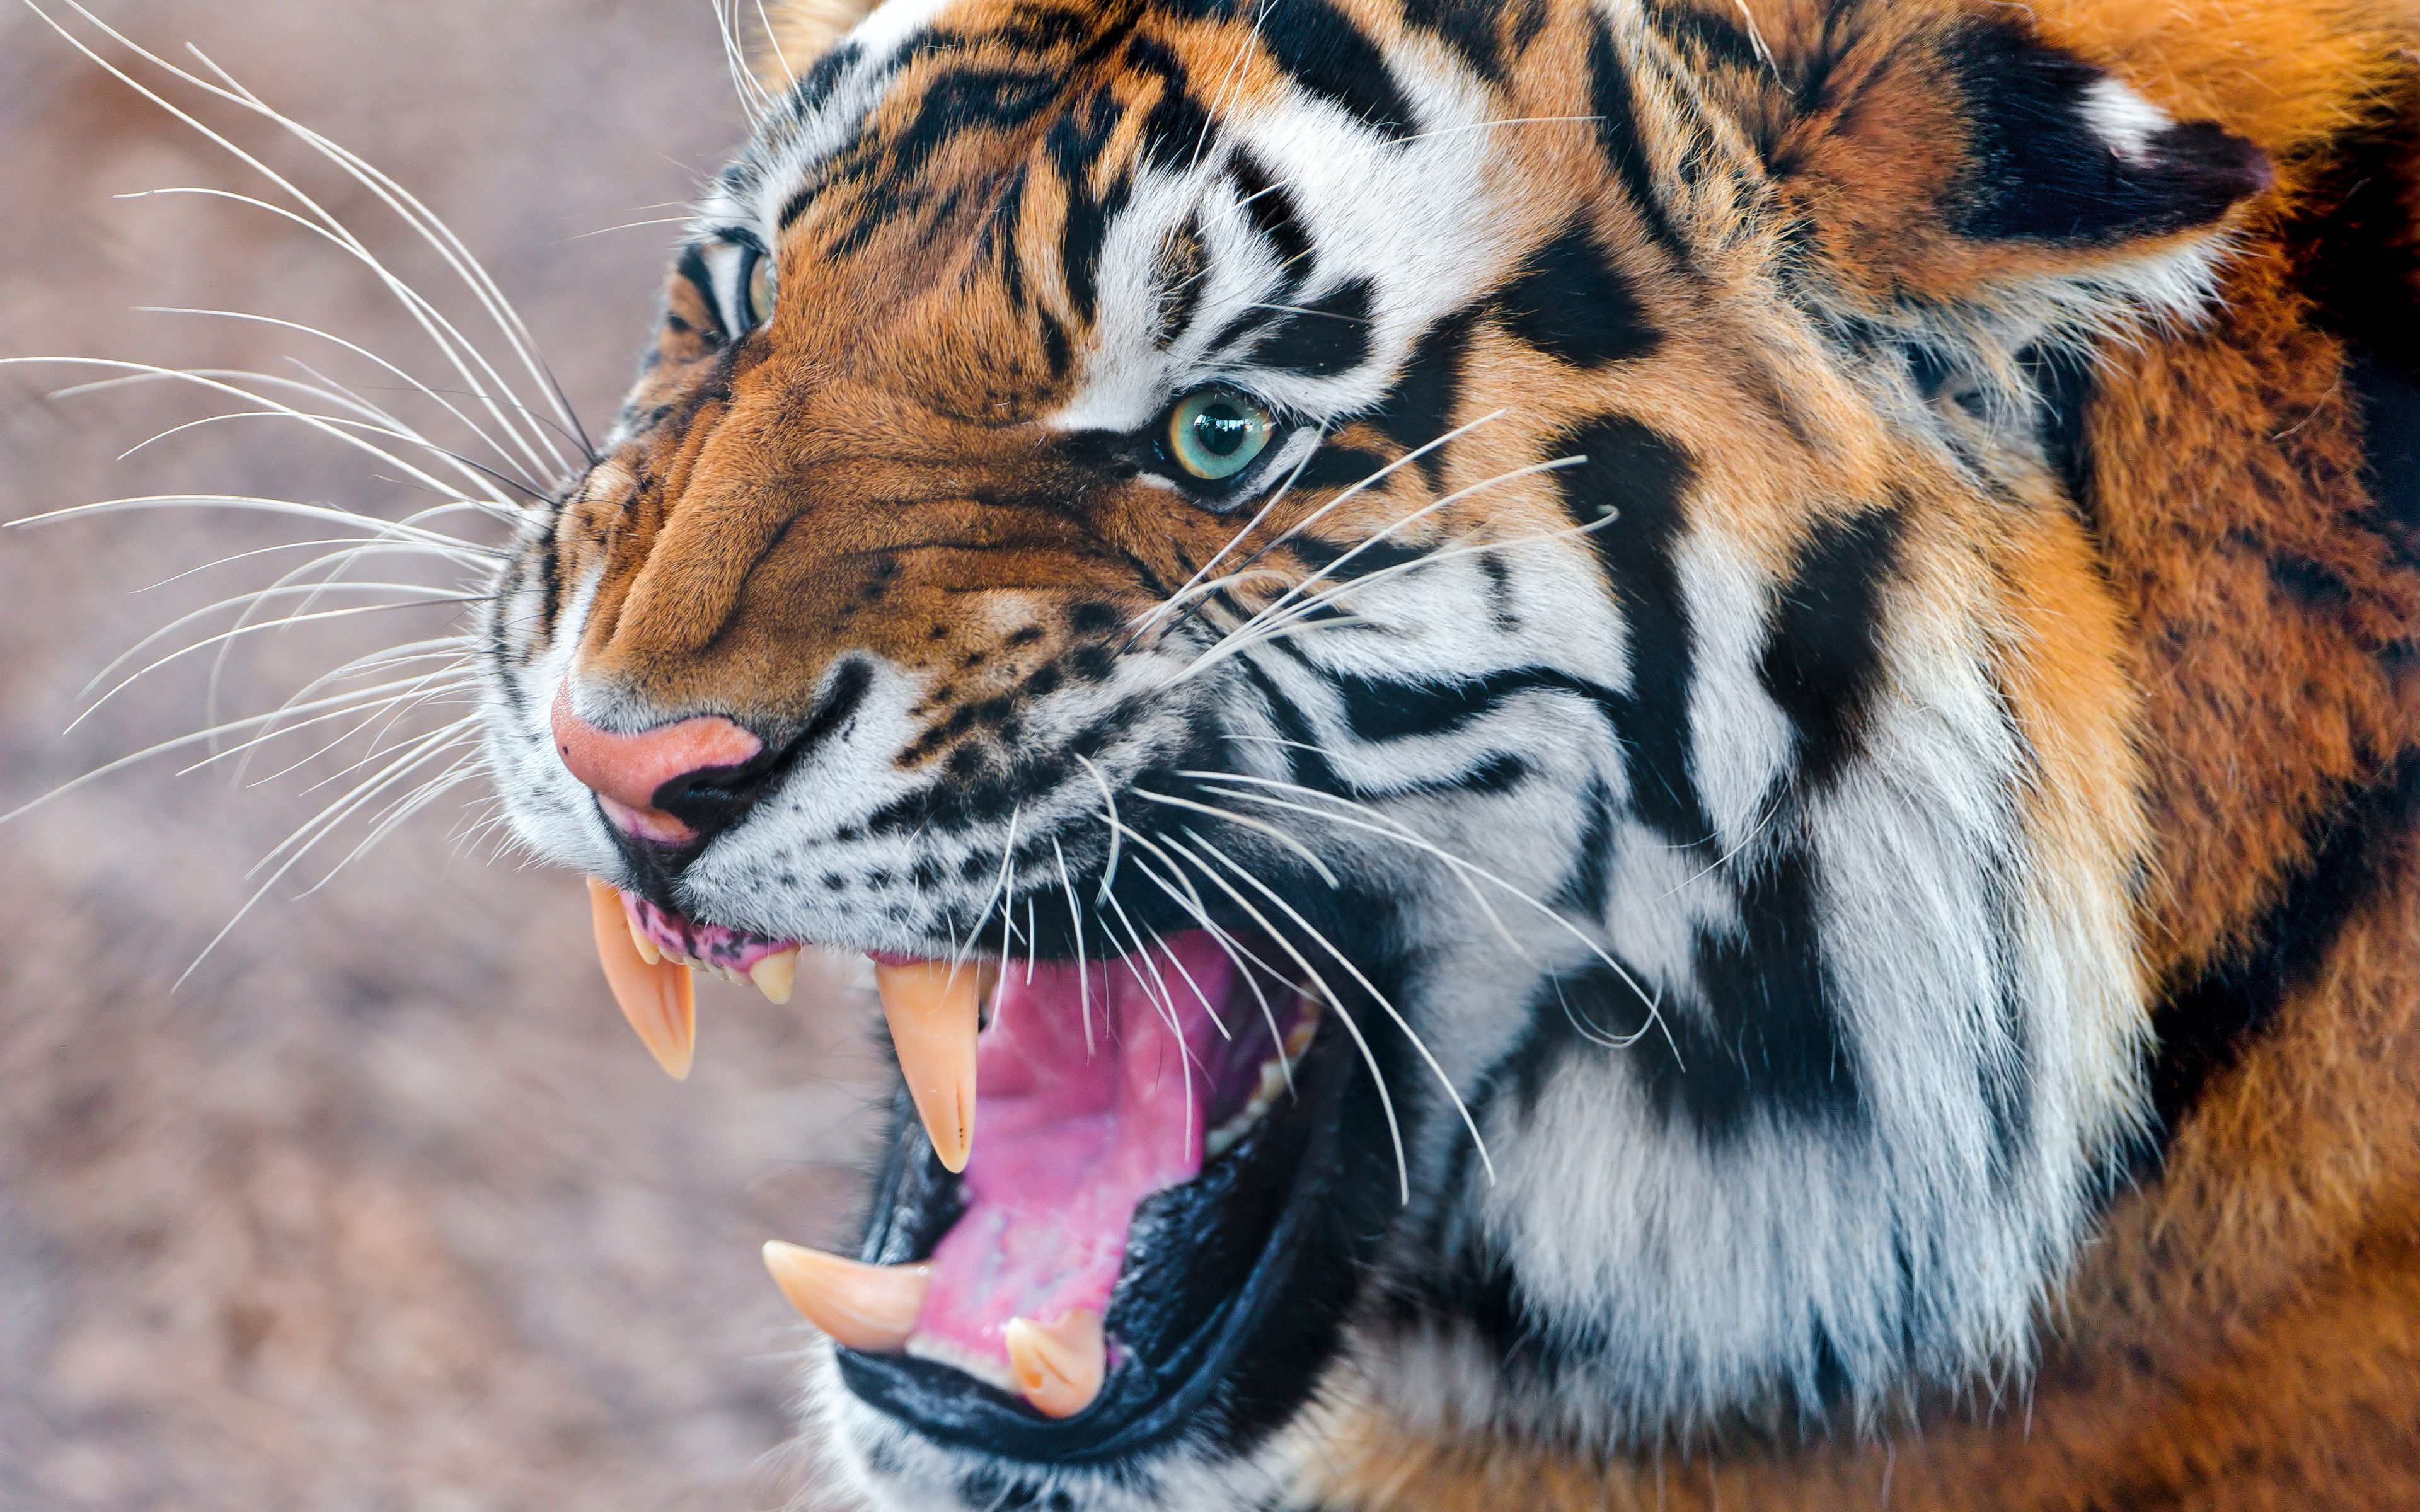 grin, tiger, animals, aggression, muzzle, anger iphone wallpaper